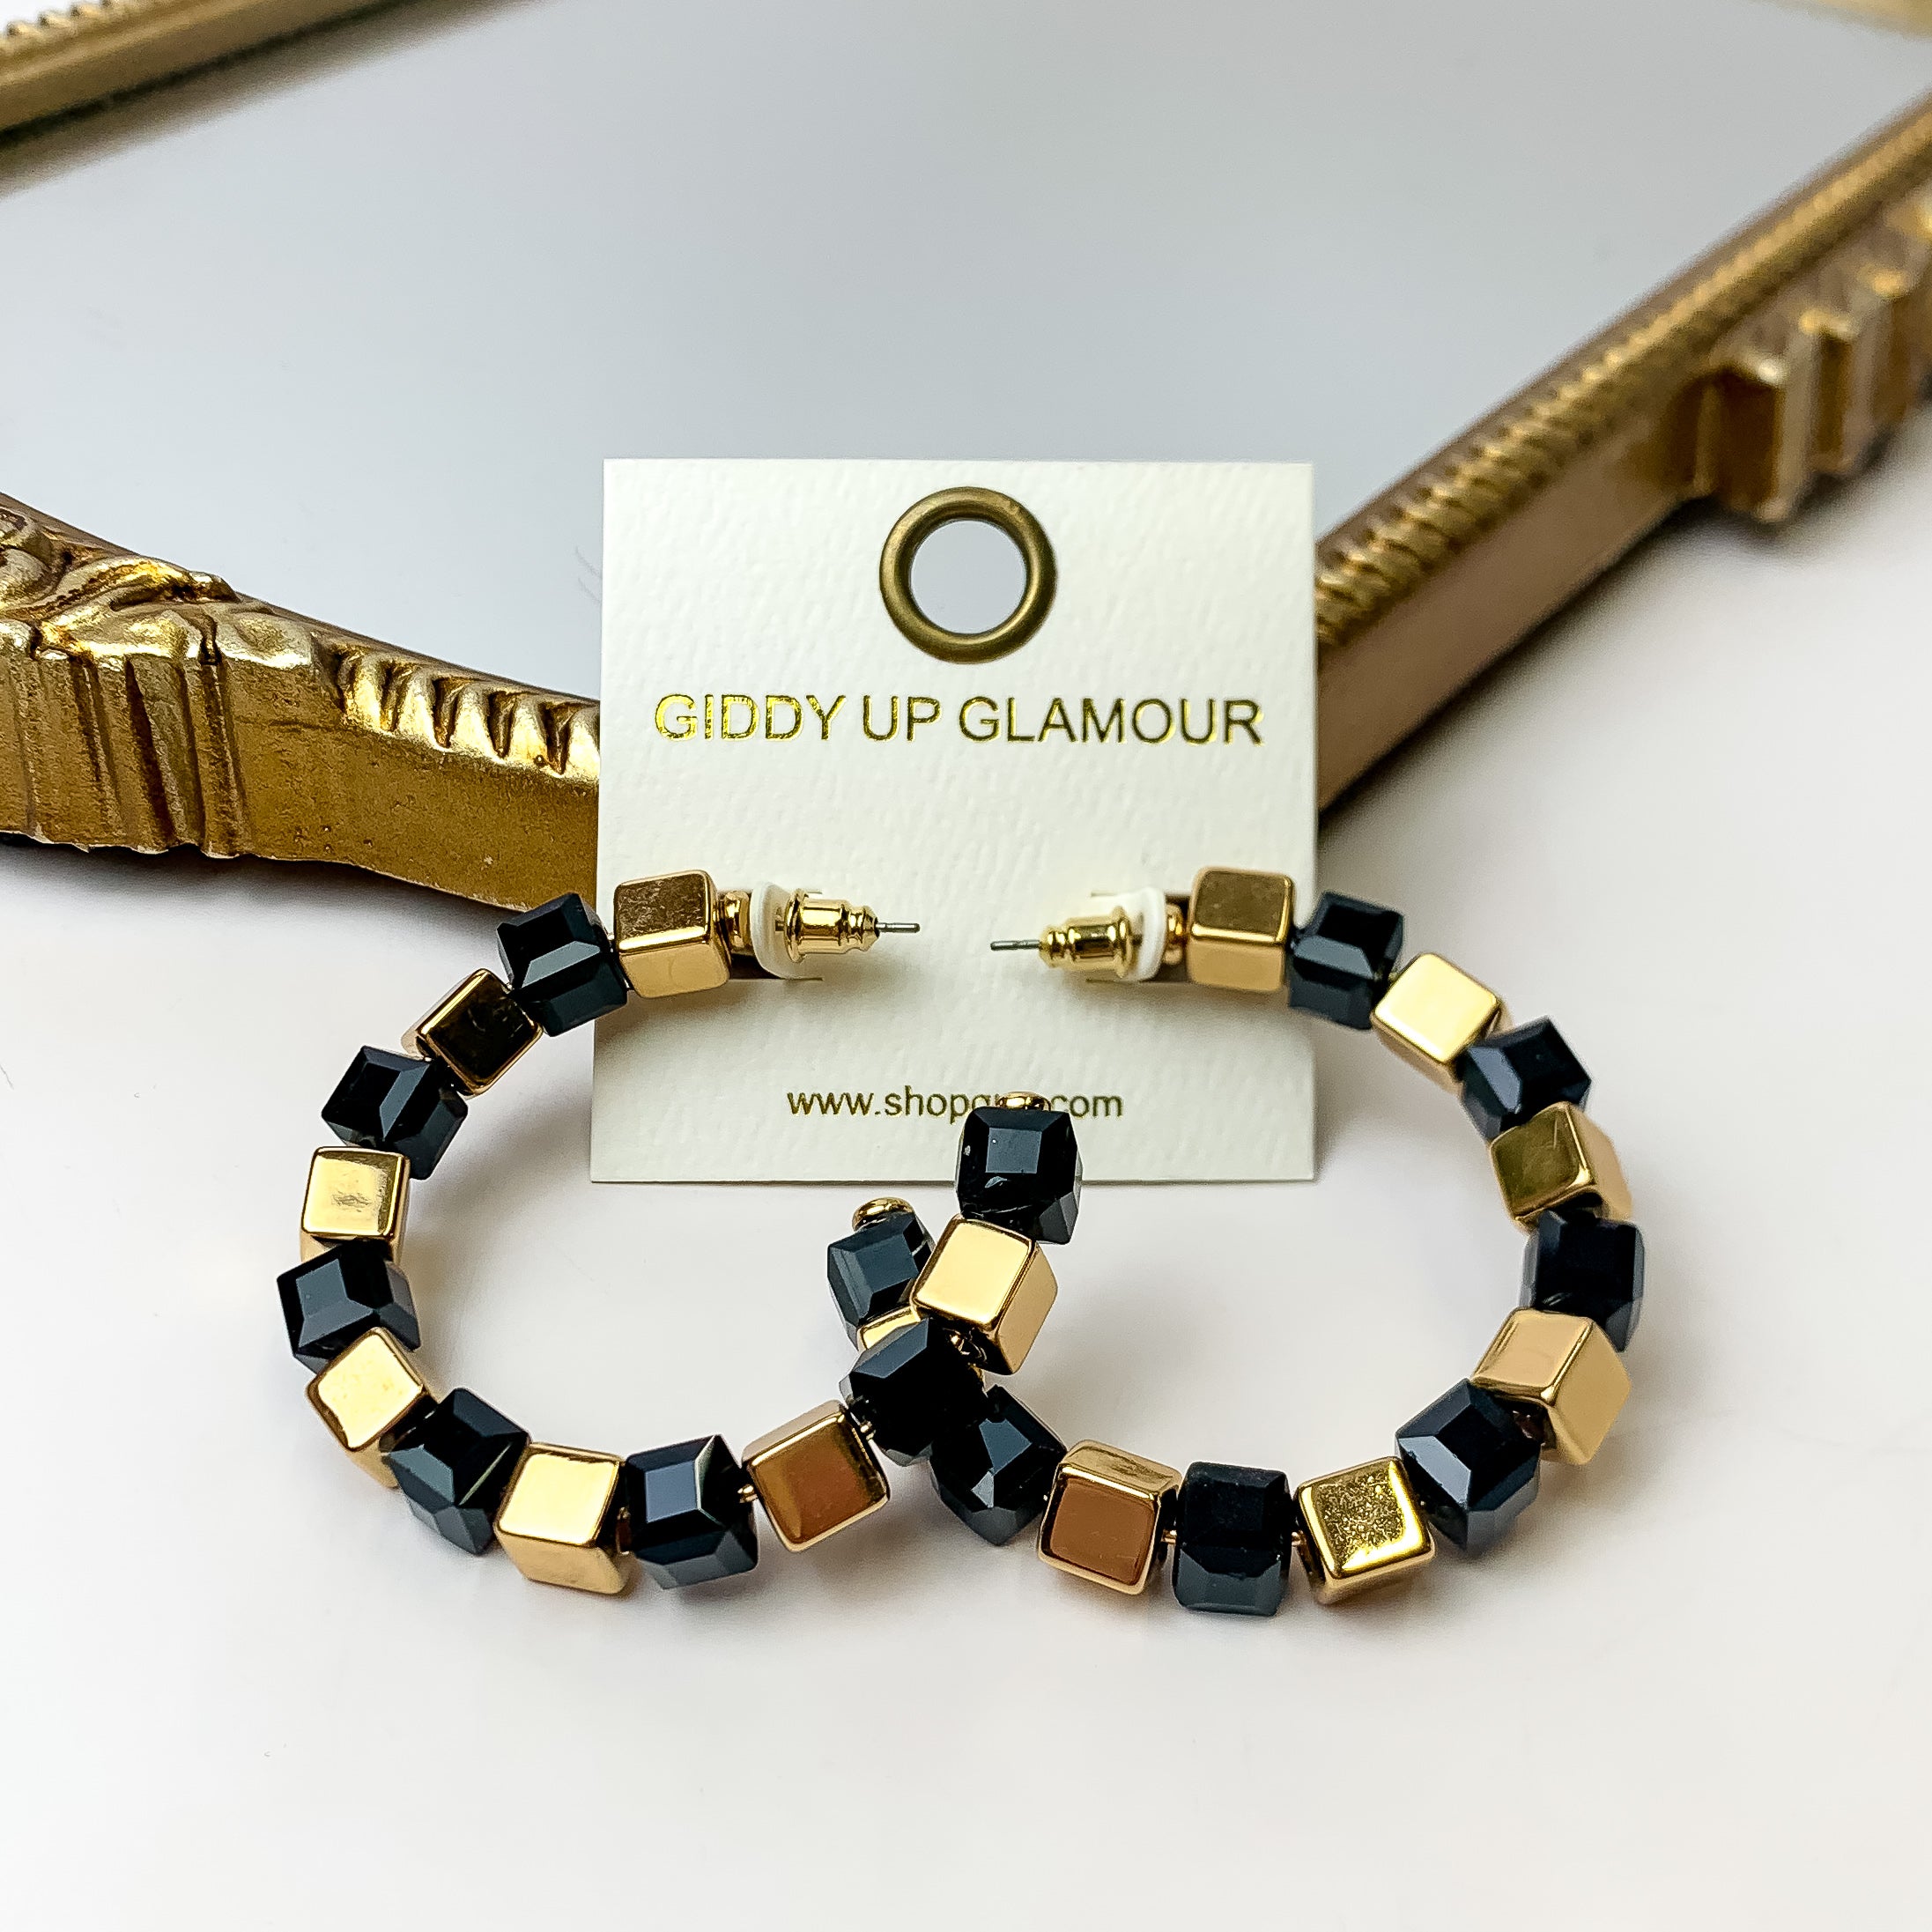 A pair of black and gold cubed hoop earrings on an ivory earring card. These earrings are placed against a gold mirror with a white background.